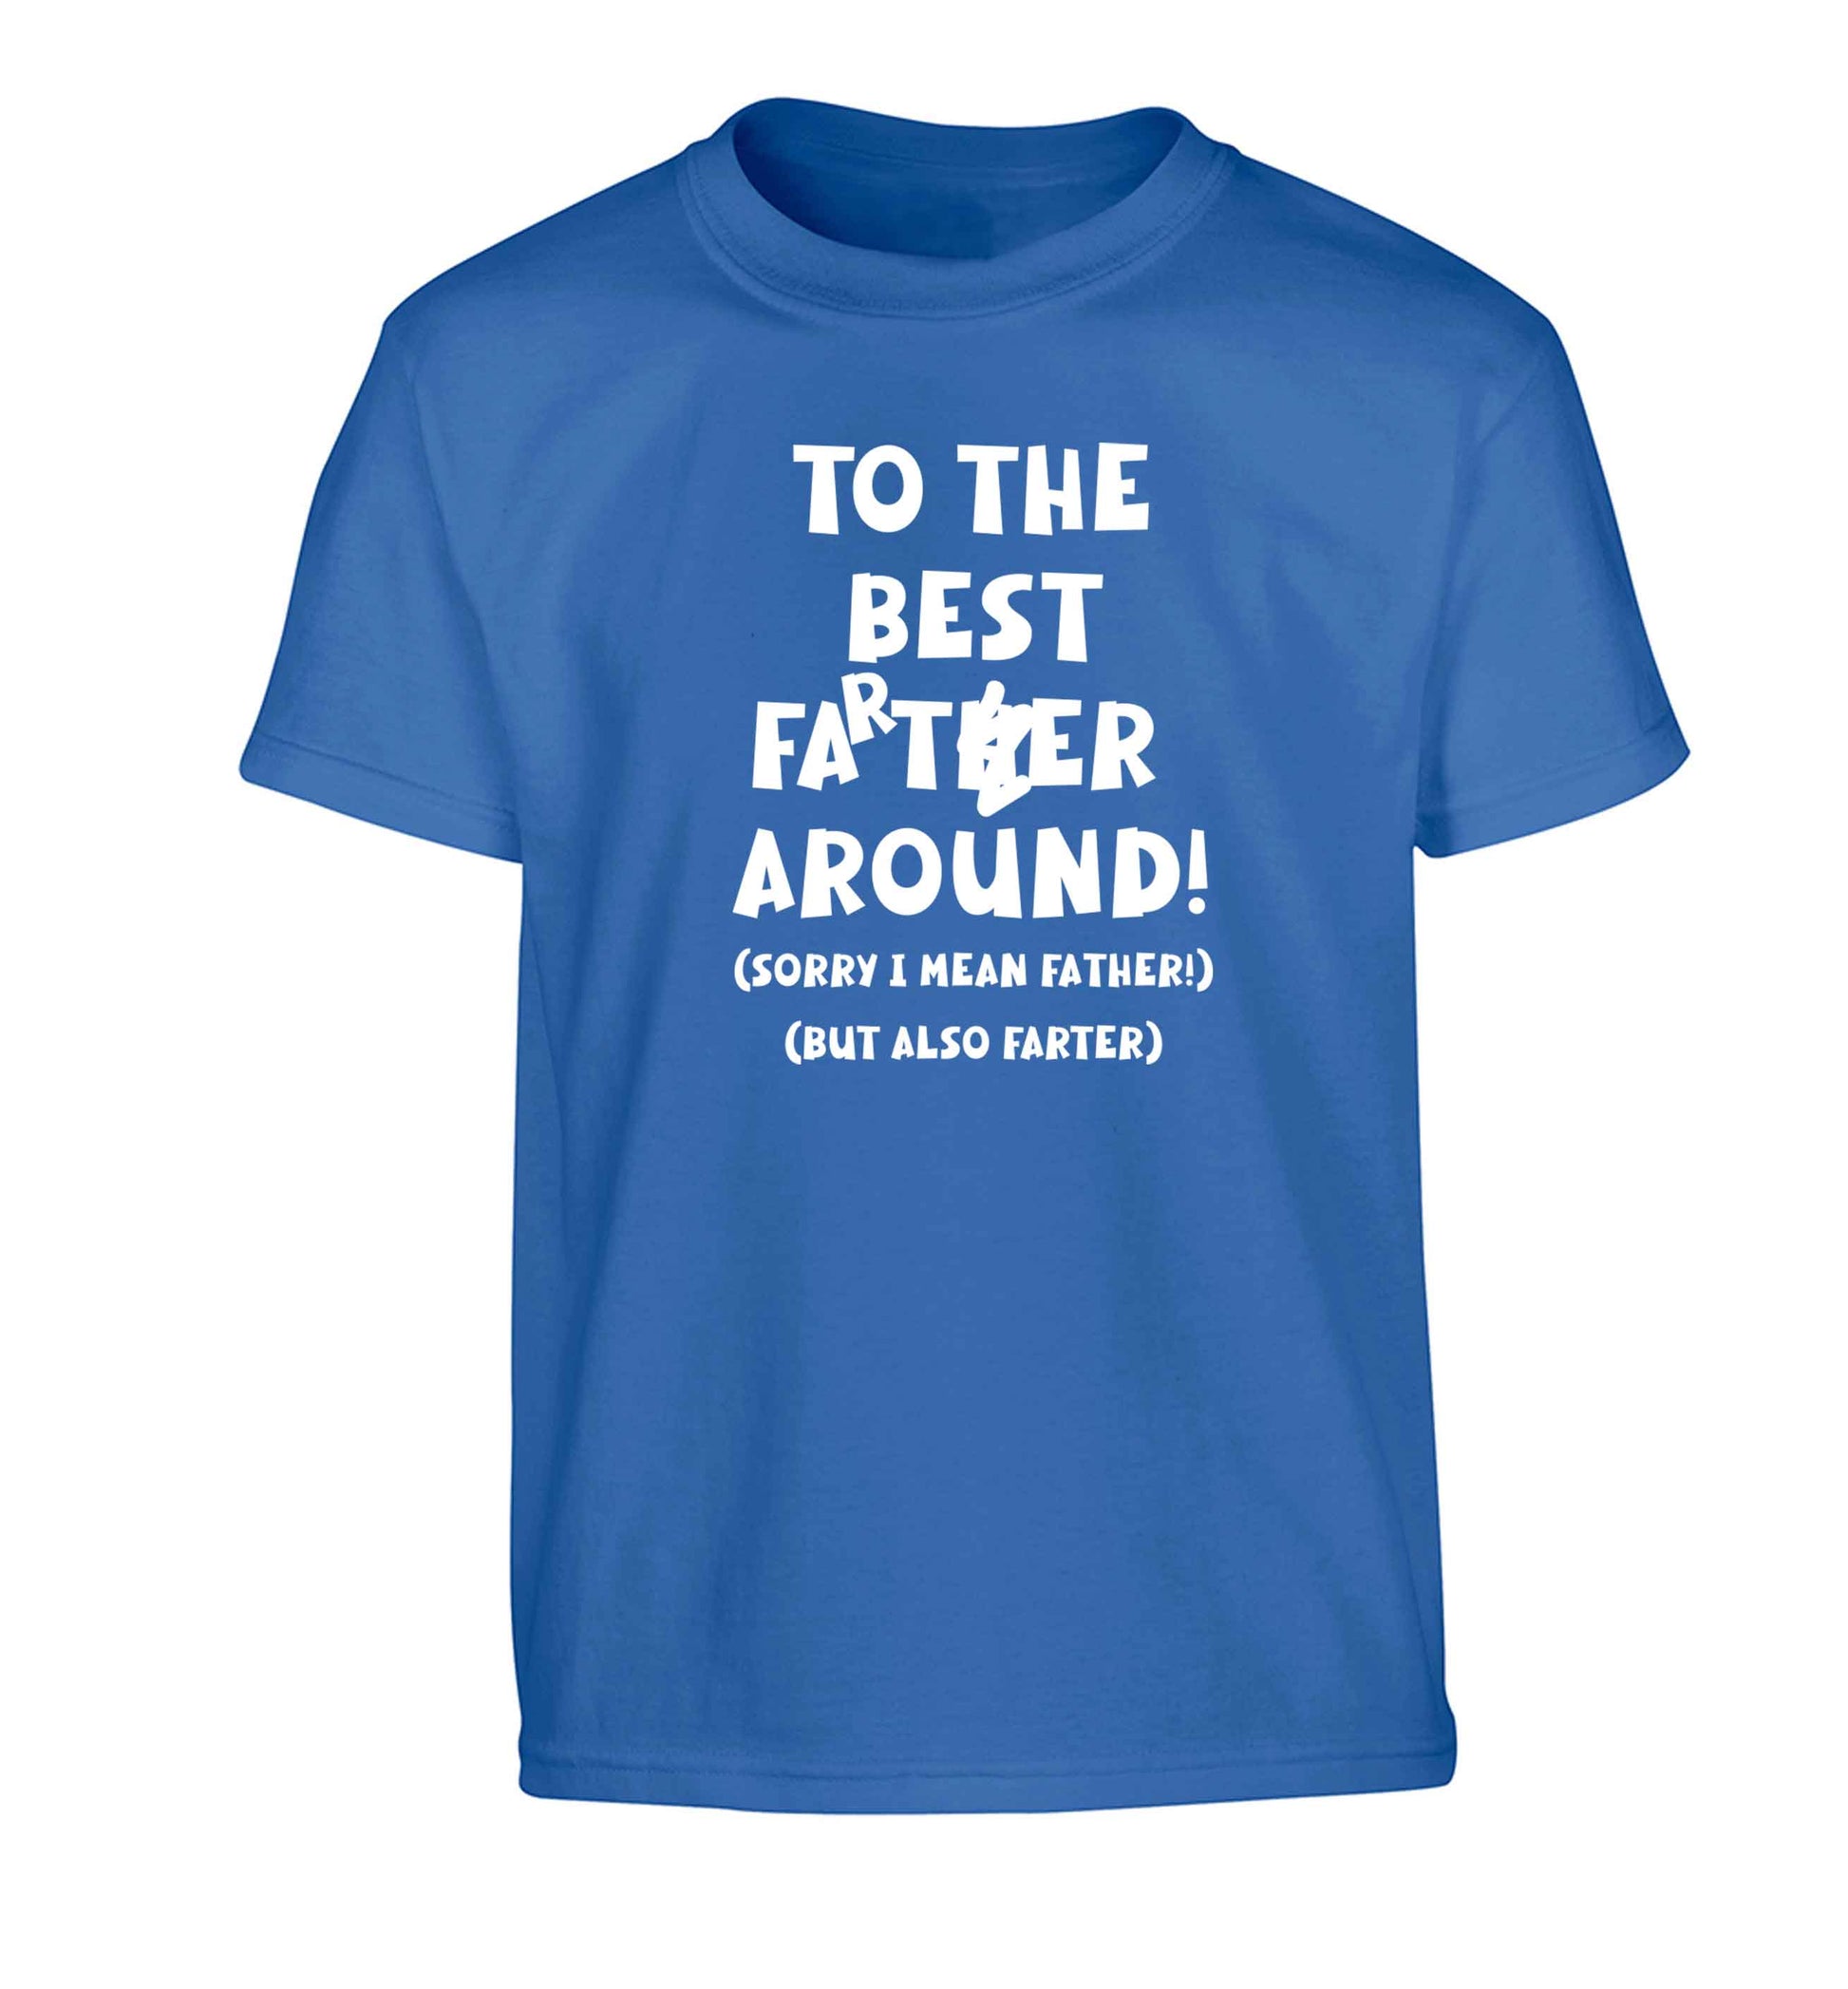 To the best farter around! Sorry I mean father, but also farter Children's blue Tshirt 12-13 Years